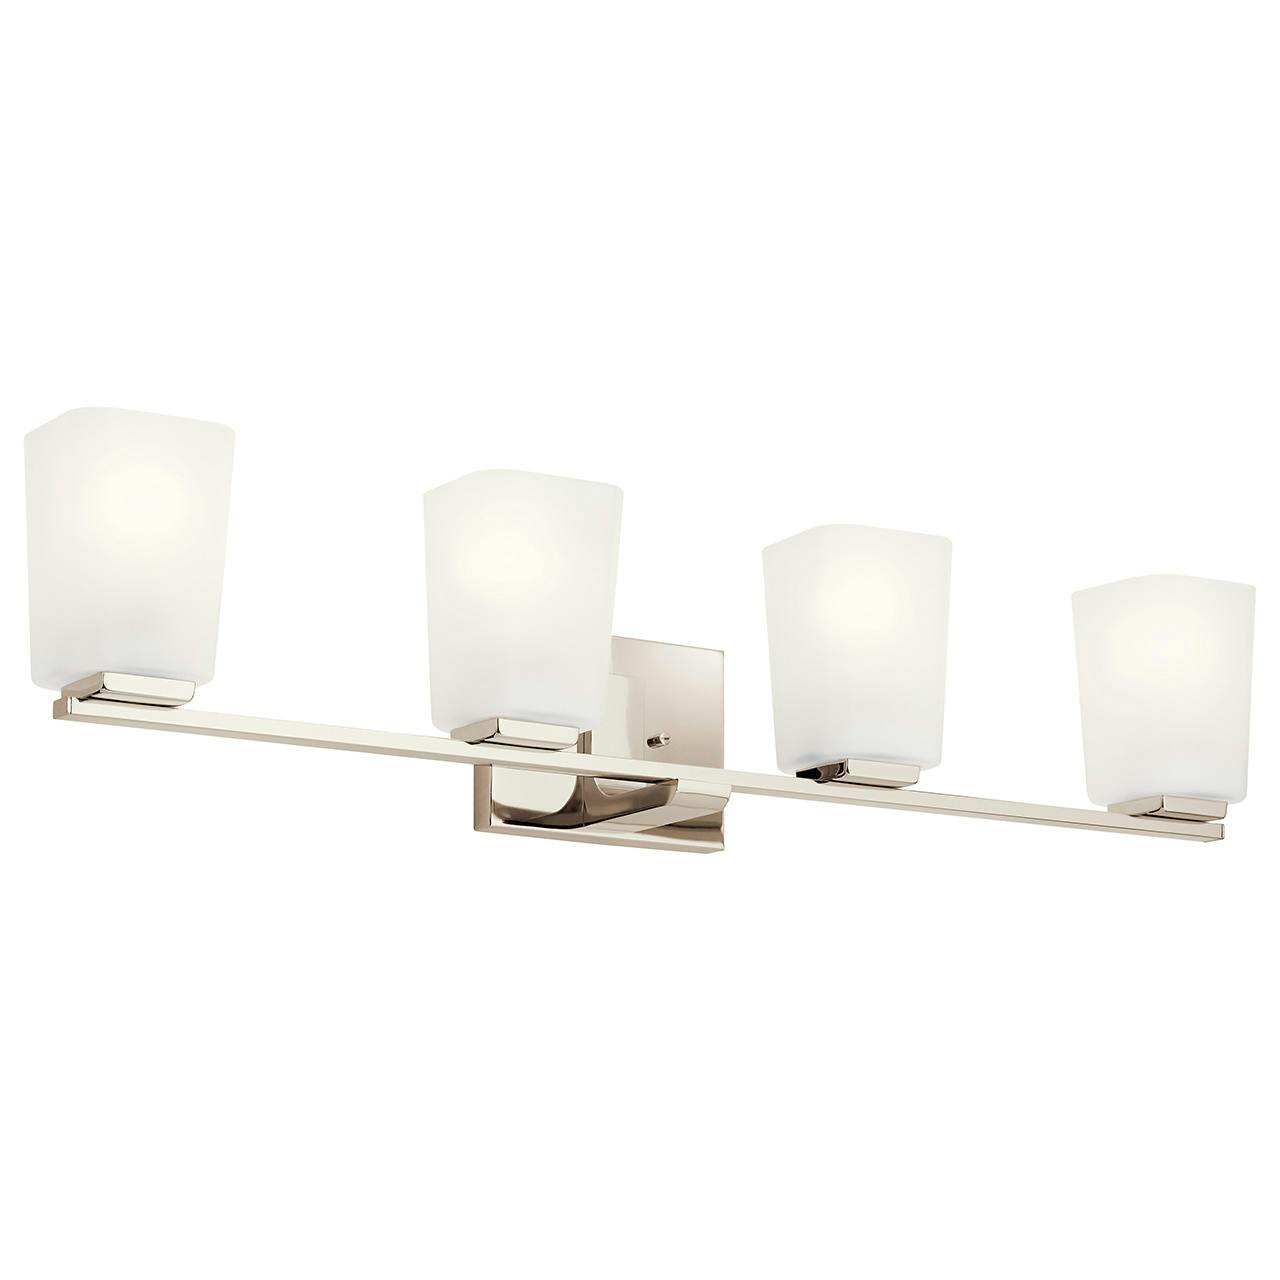 Roehm 4 Light Vanity Light Nickel on a white background